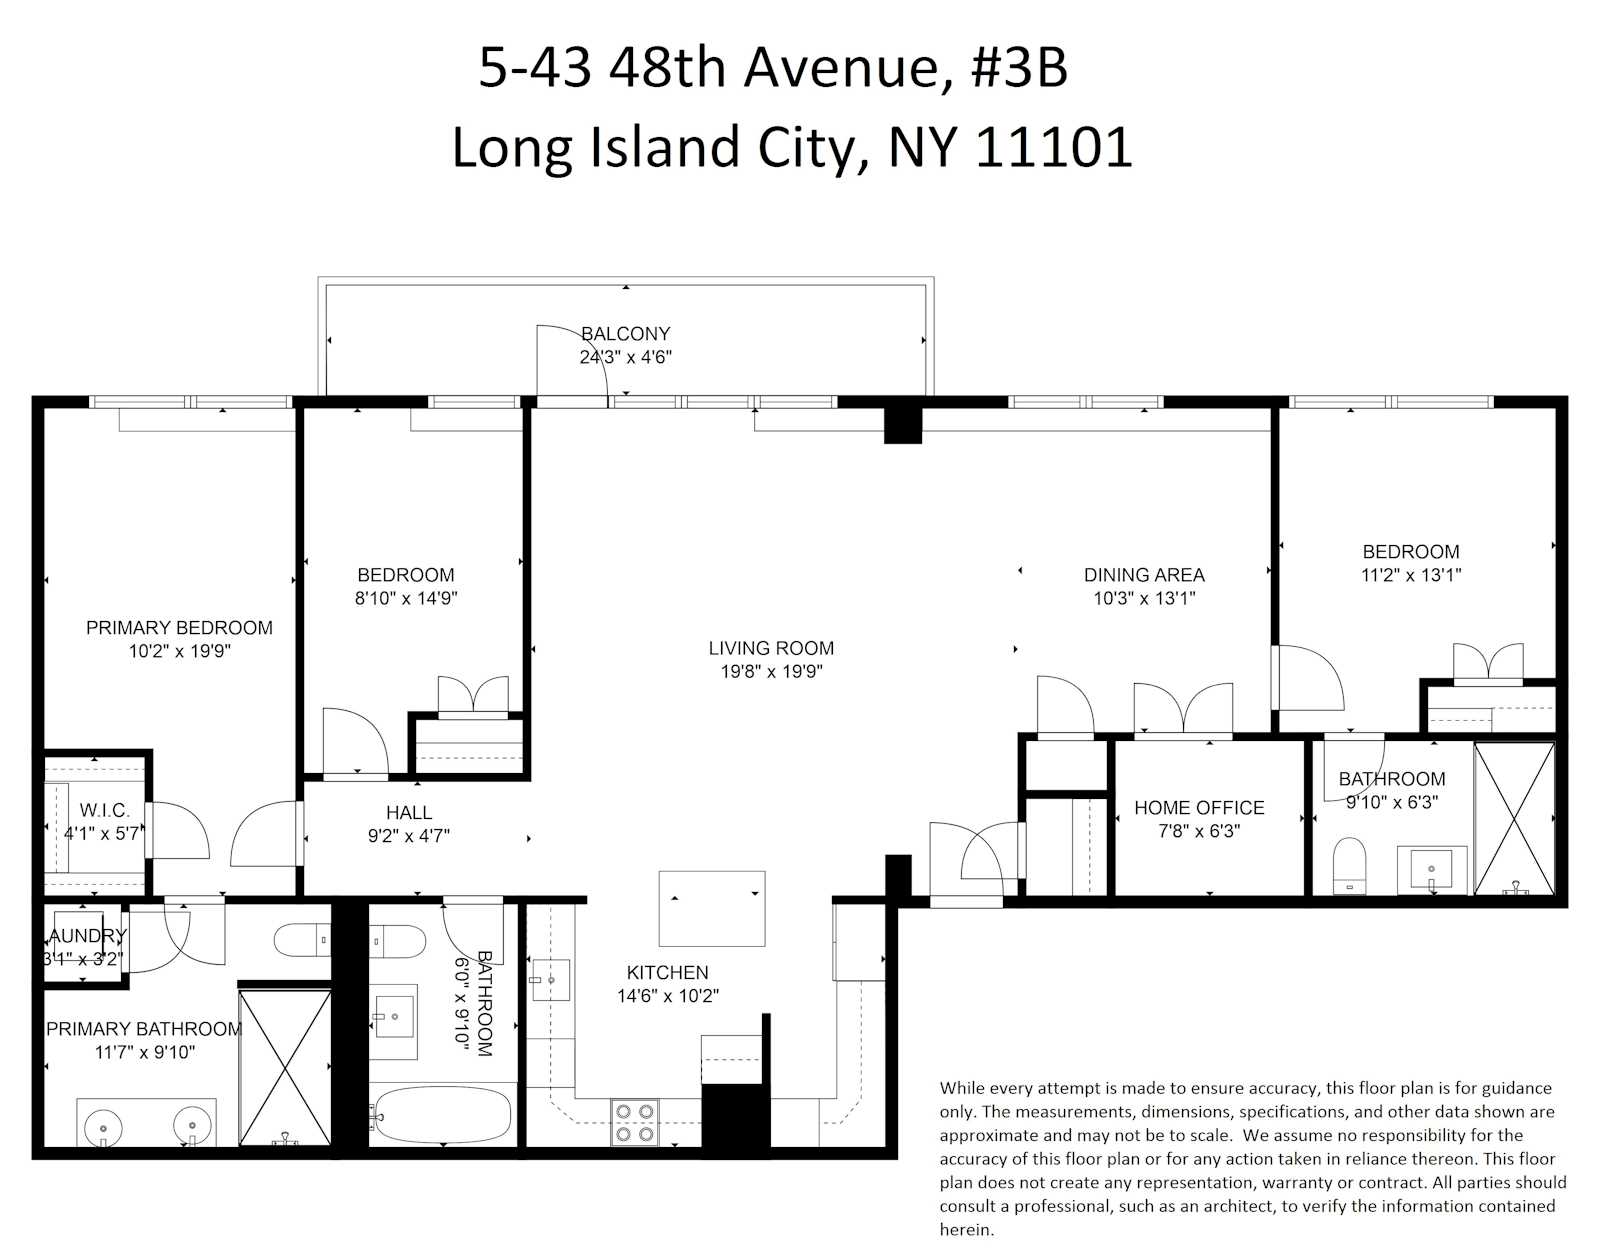 Floorplan for 5-43 48th Ave